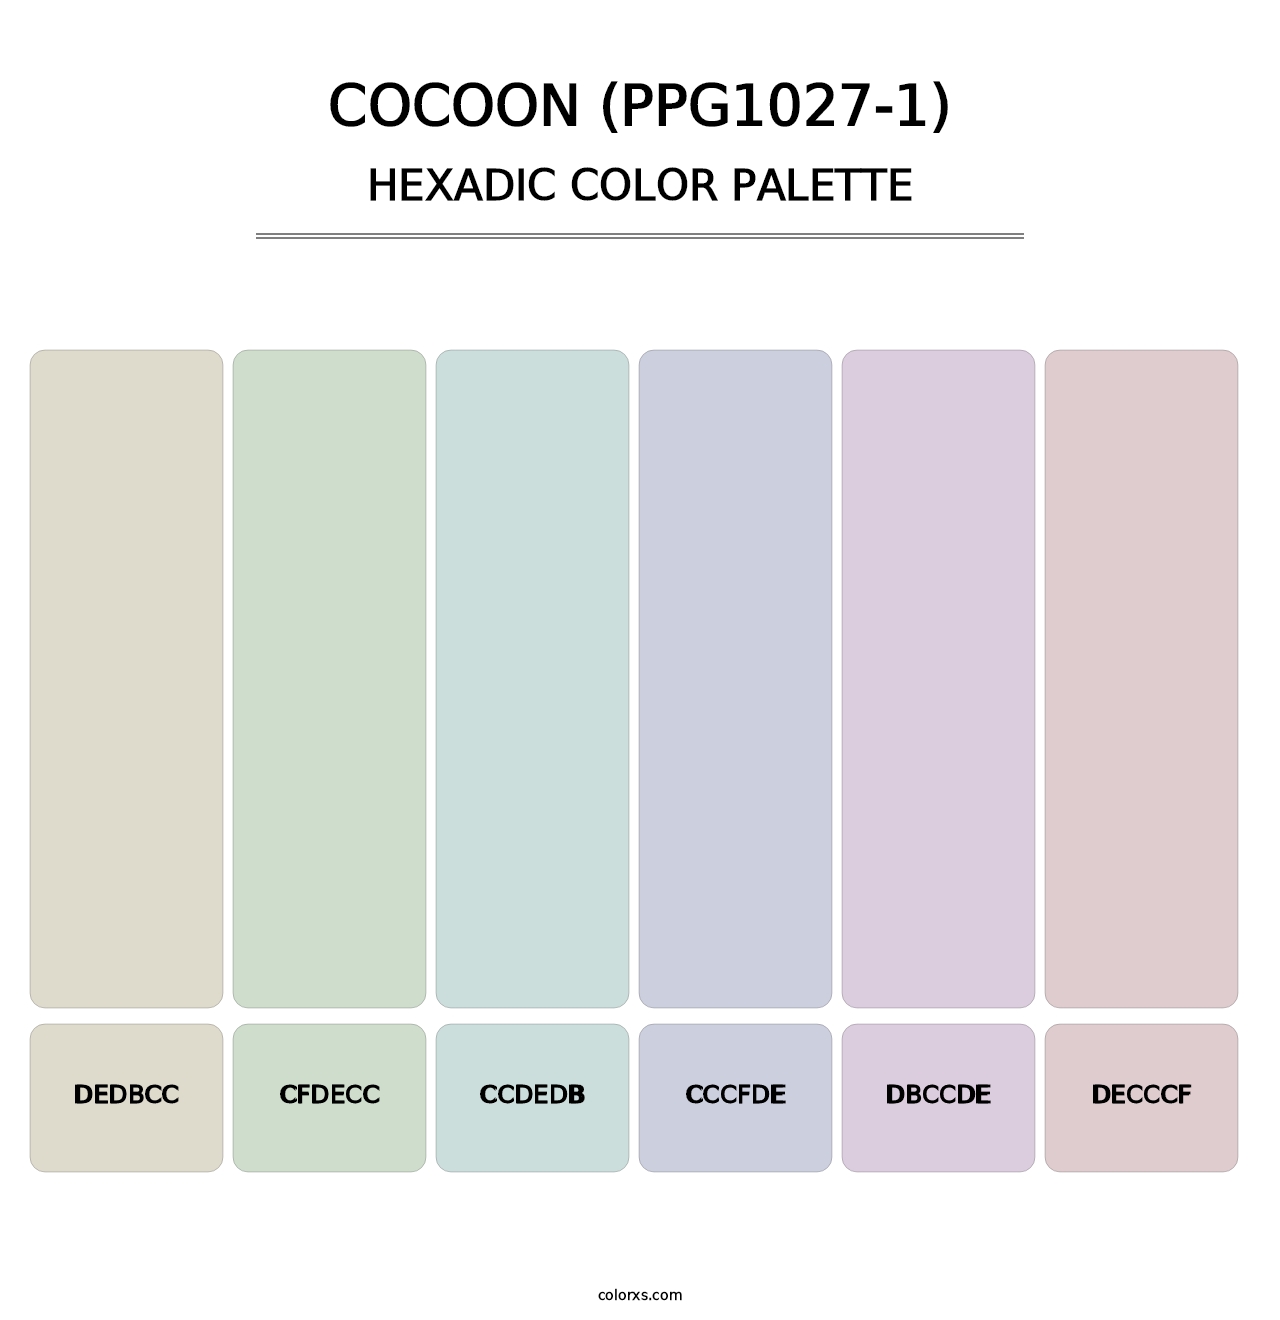 Cocoon (PPG1027-1) - Hexadic Color Palette